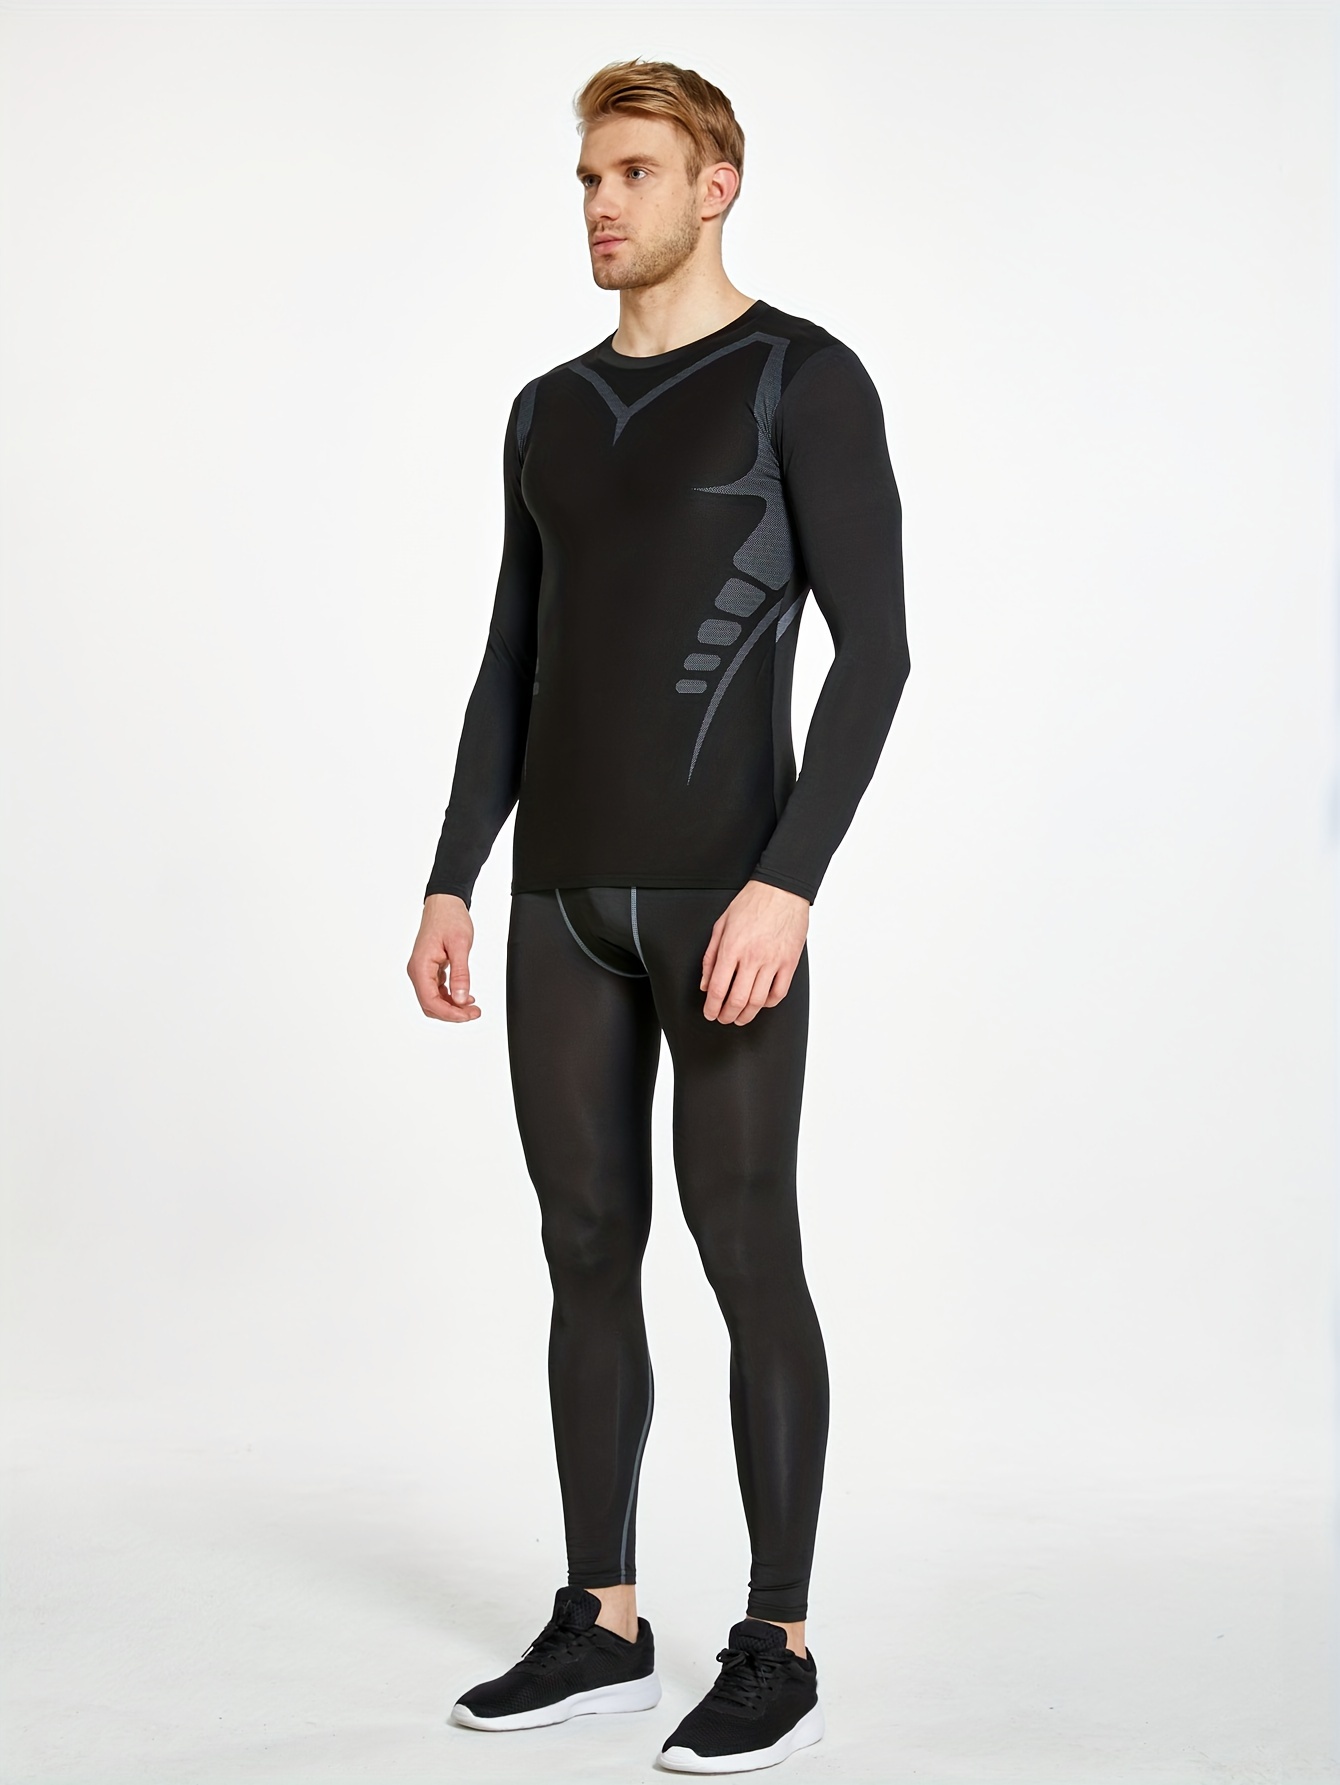 Mens Quick Dry Compression Sports Suit Set Long Johns, Long Leggings,  Compression T Shirt, And Sleeve Legging From Covde, $12.04